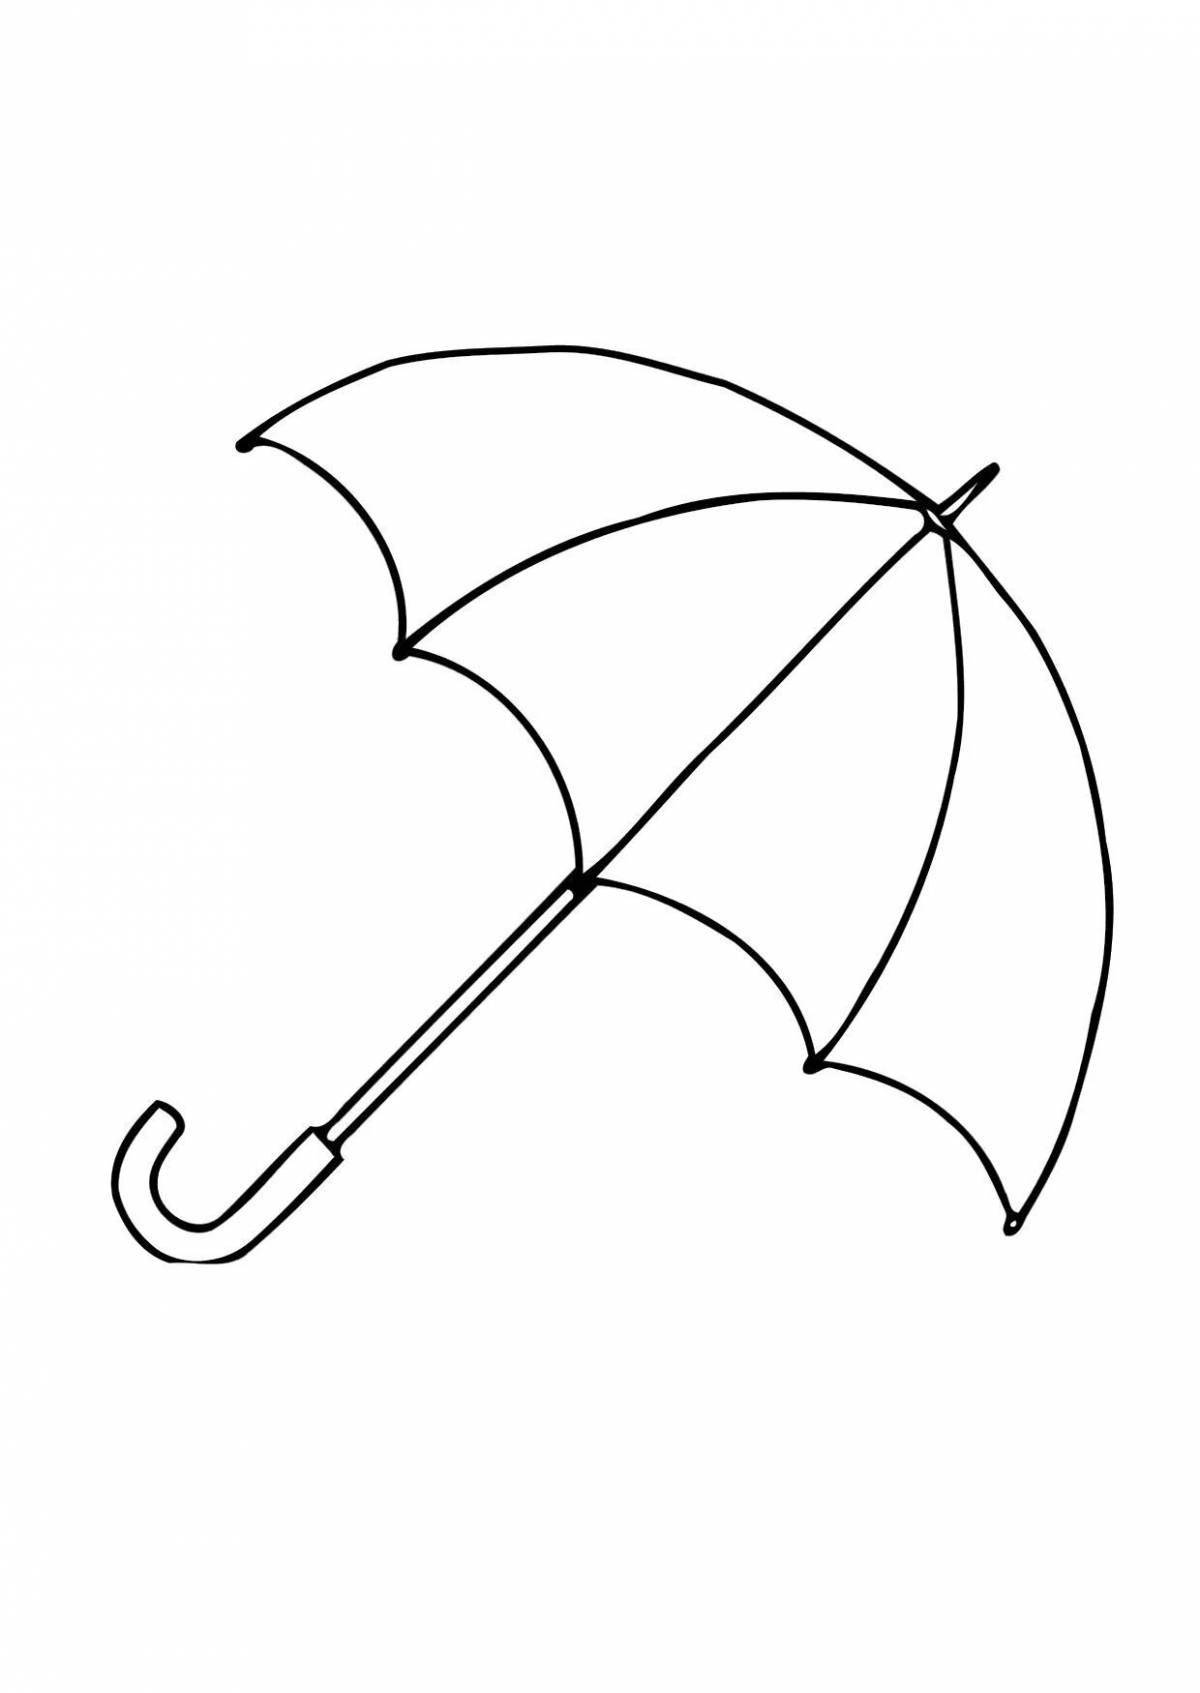 Colorful and colorful and joyful umbrella coloring book for kids